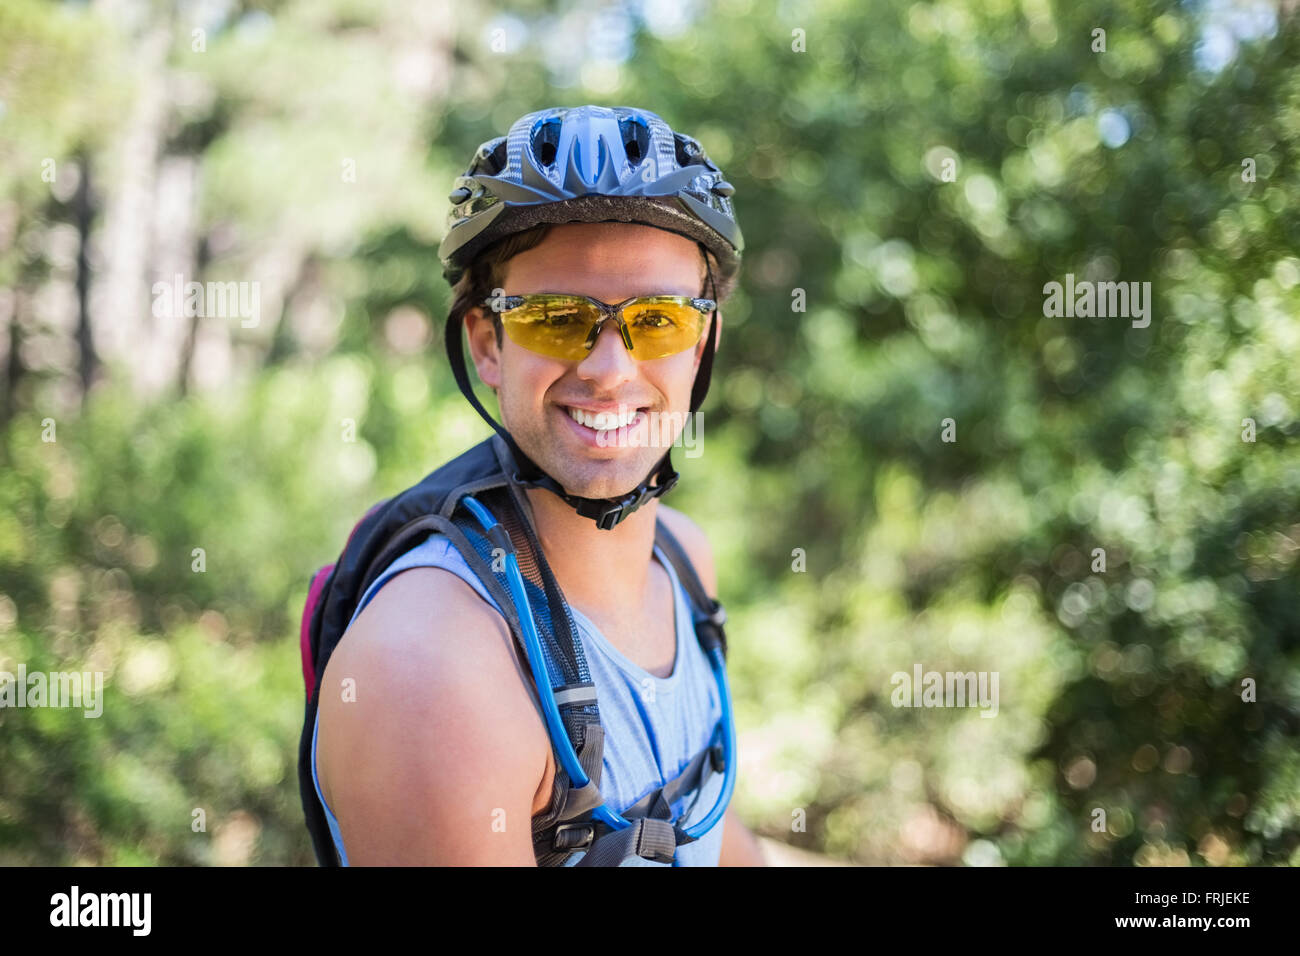 Portrait of smiling man wearing helmet at forest Stock Photo